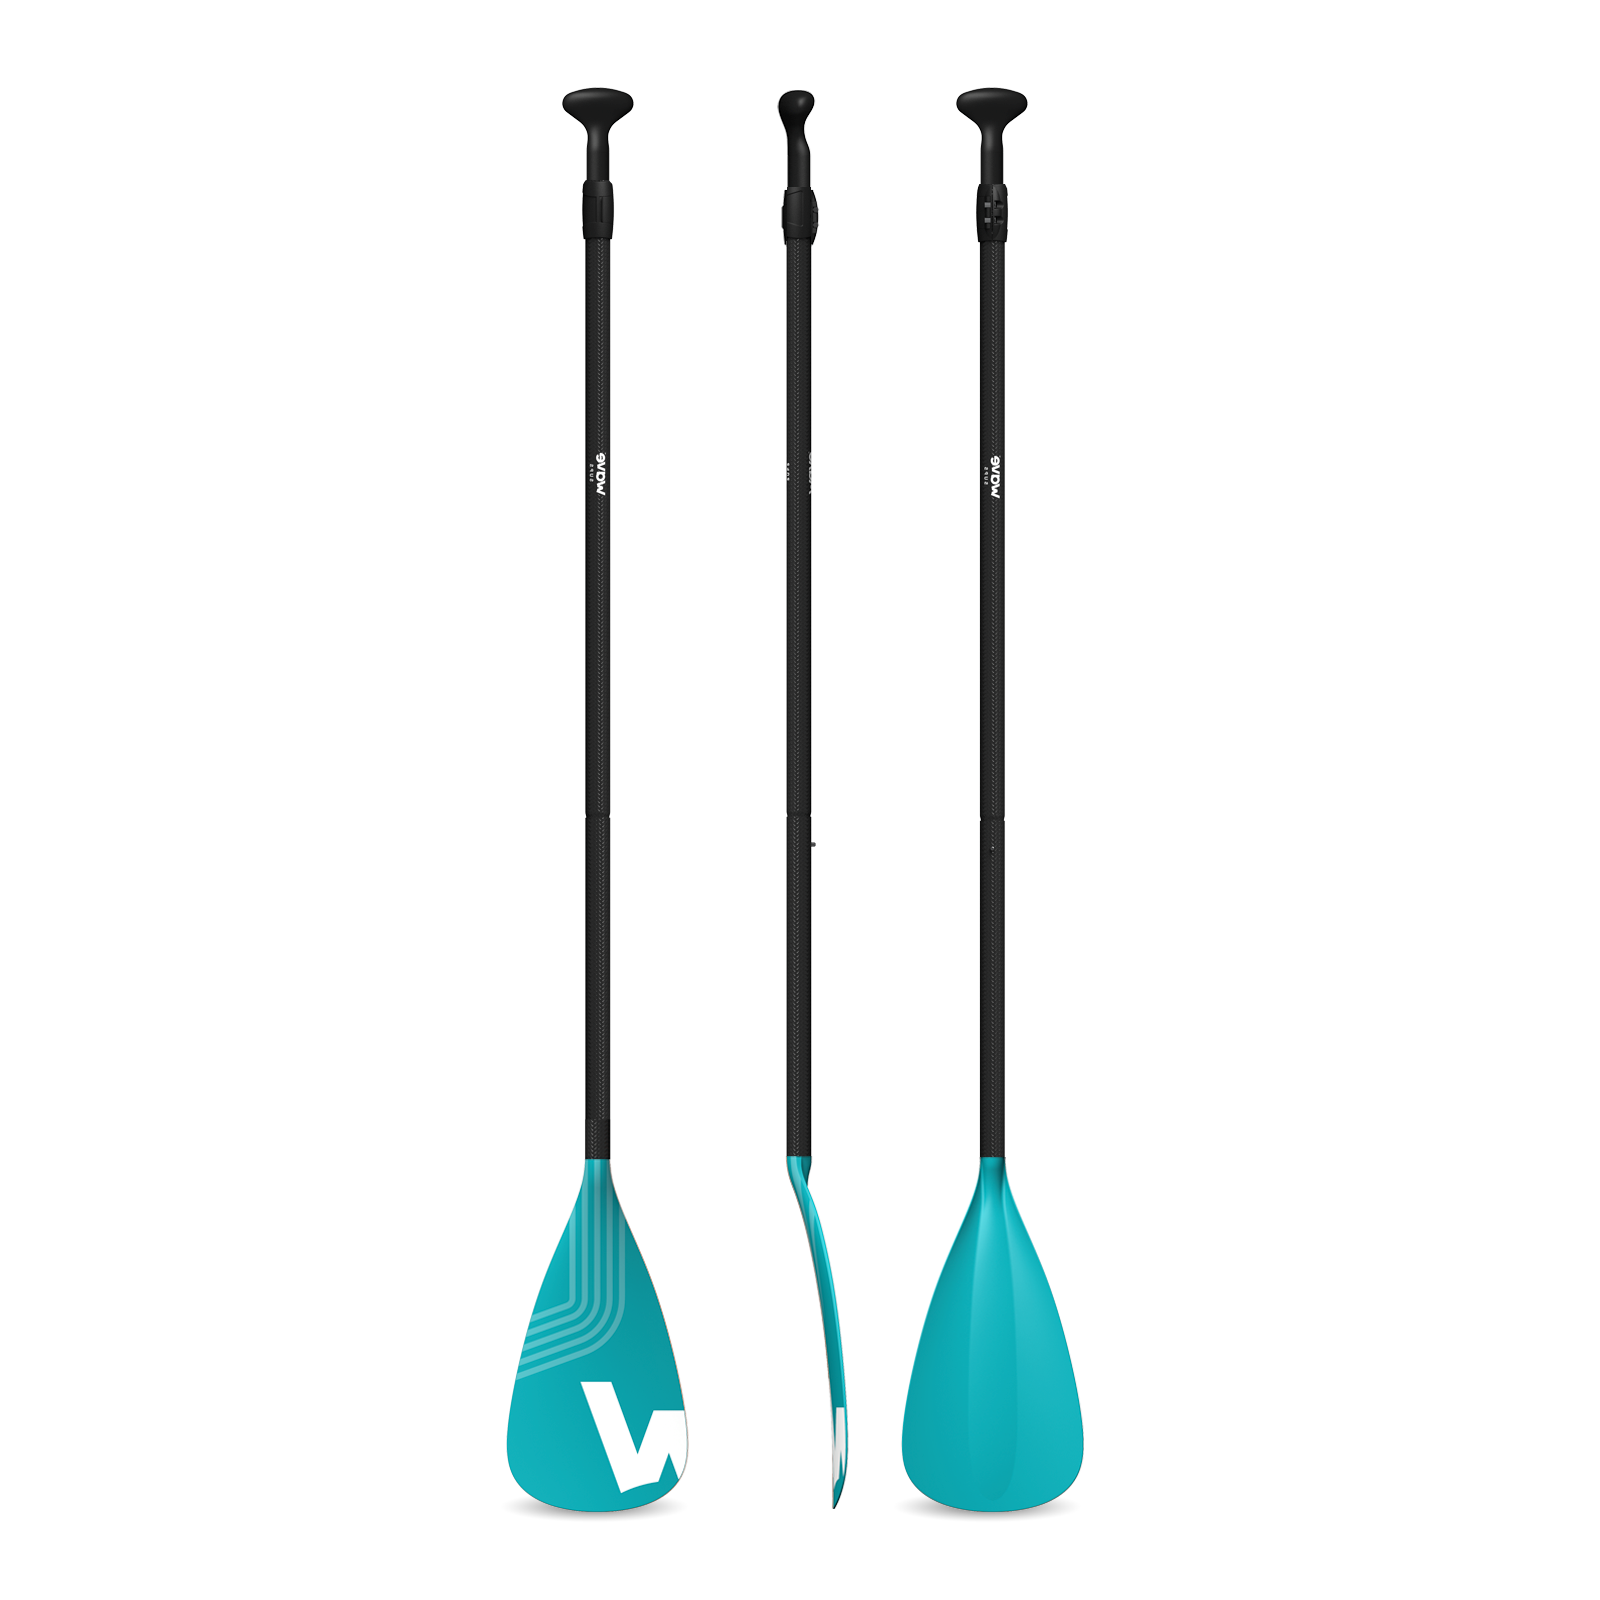 Wave Pro Paddle | Lightweight Carbon Shaft Nylon Paddle in Aqua - Wave Sups Inflatable Paddle boards